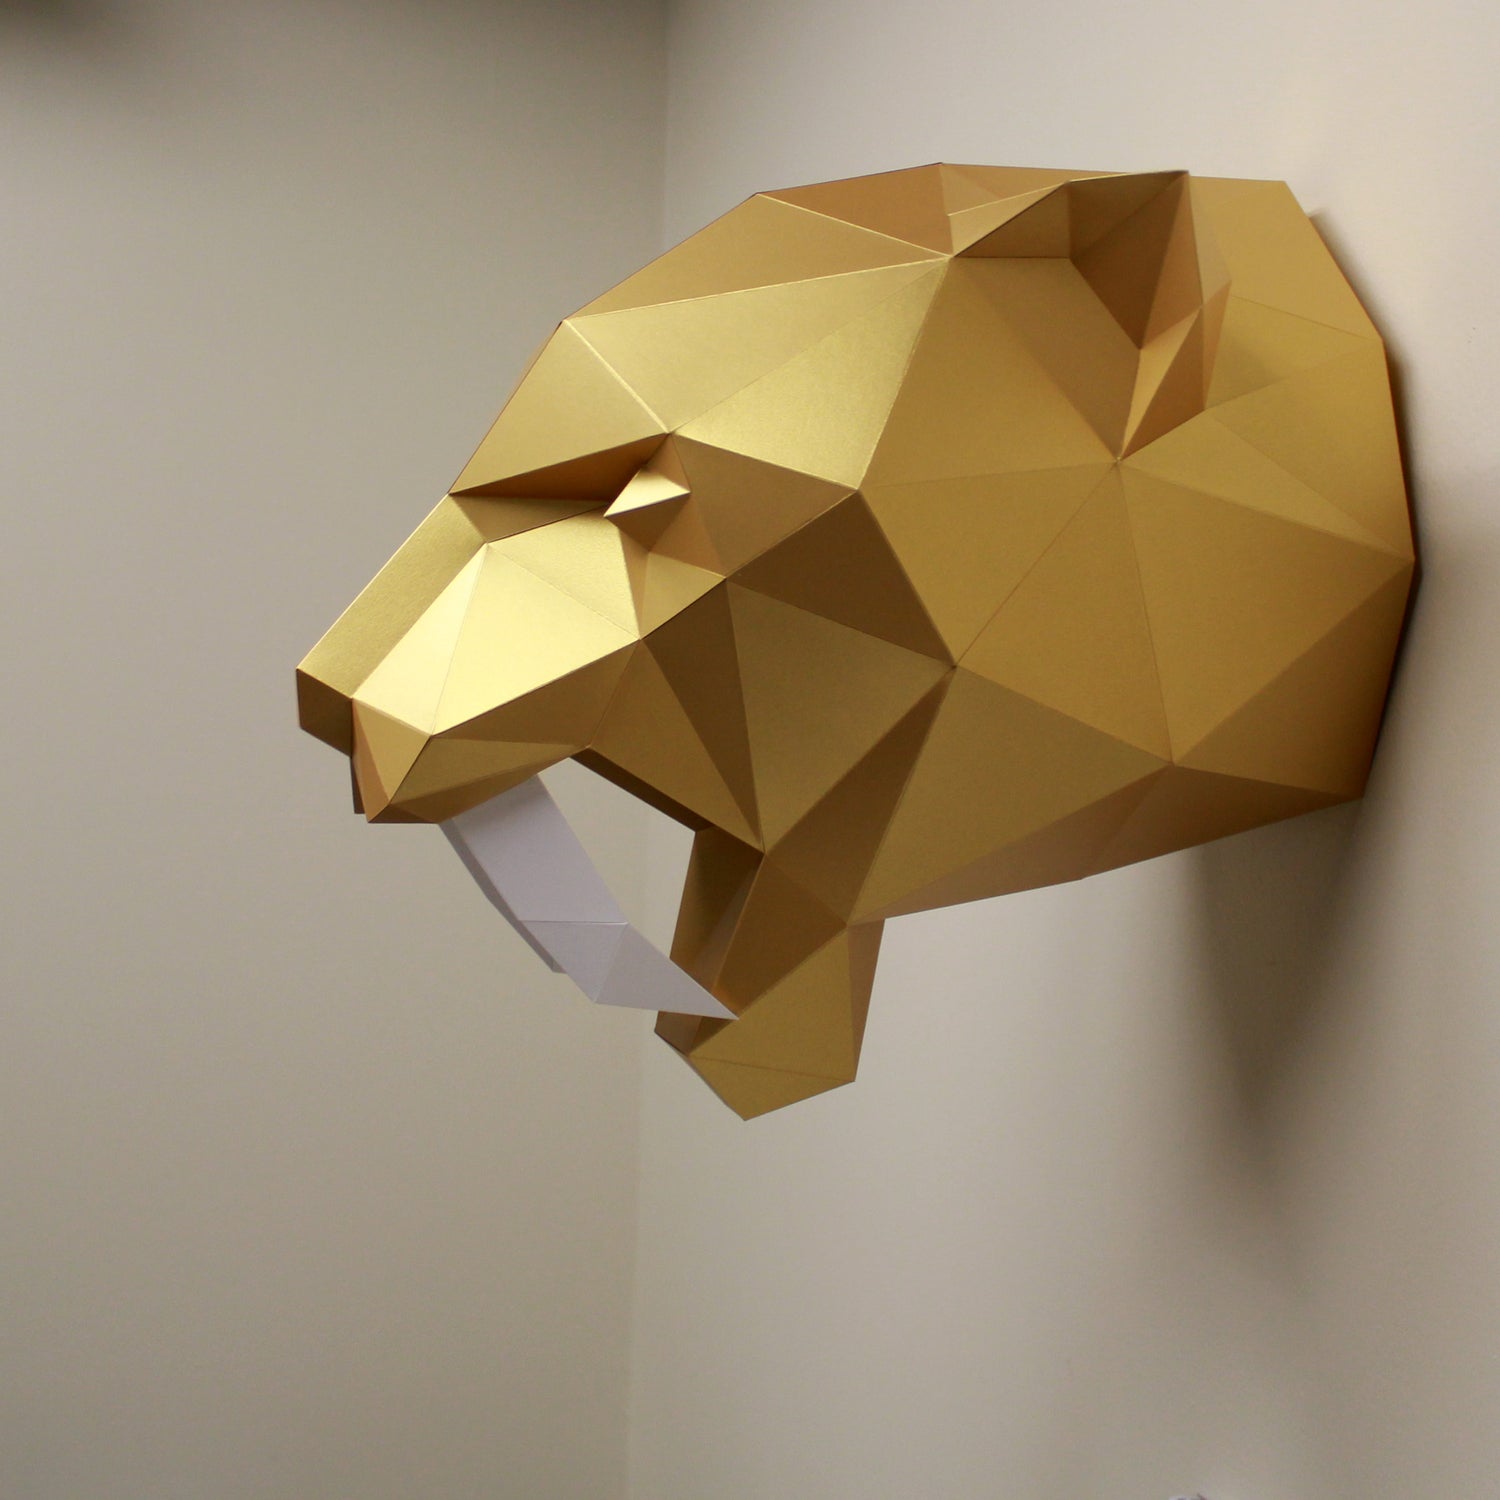 Saber-Tooth Tiger Origami